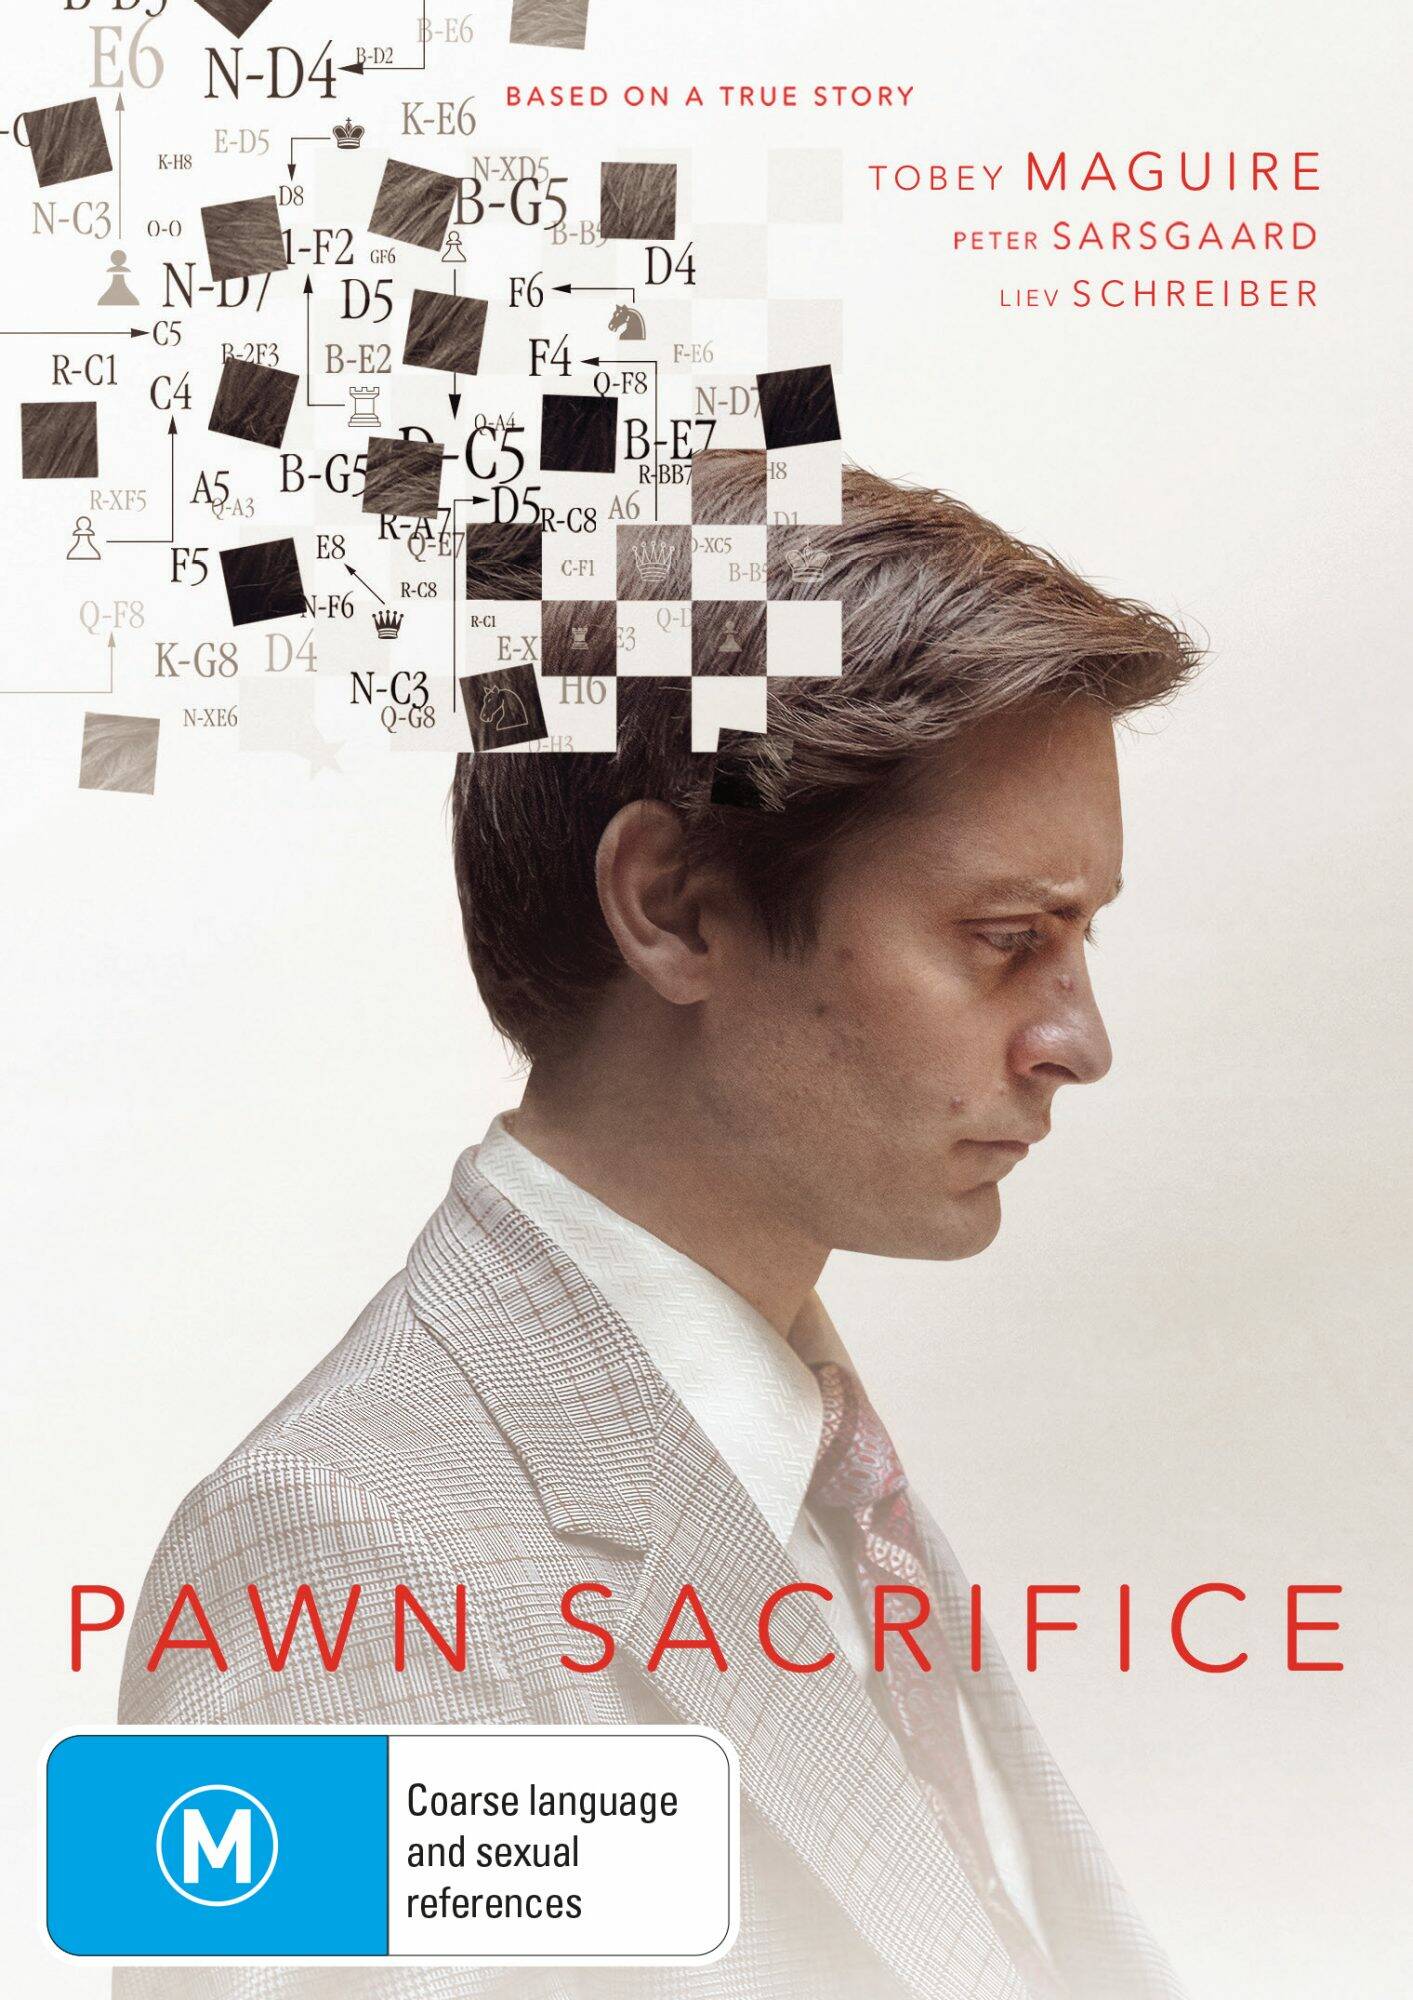 Pawn Sacrifice review: Tobey Maguire as American chess champion